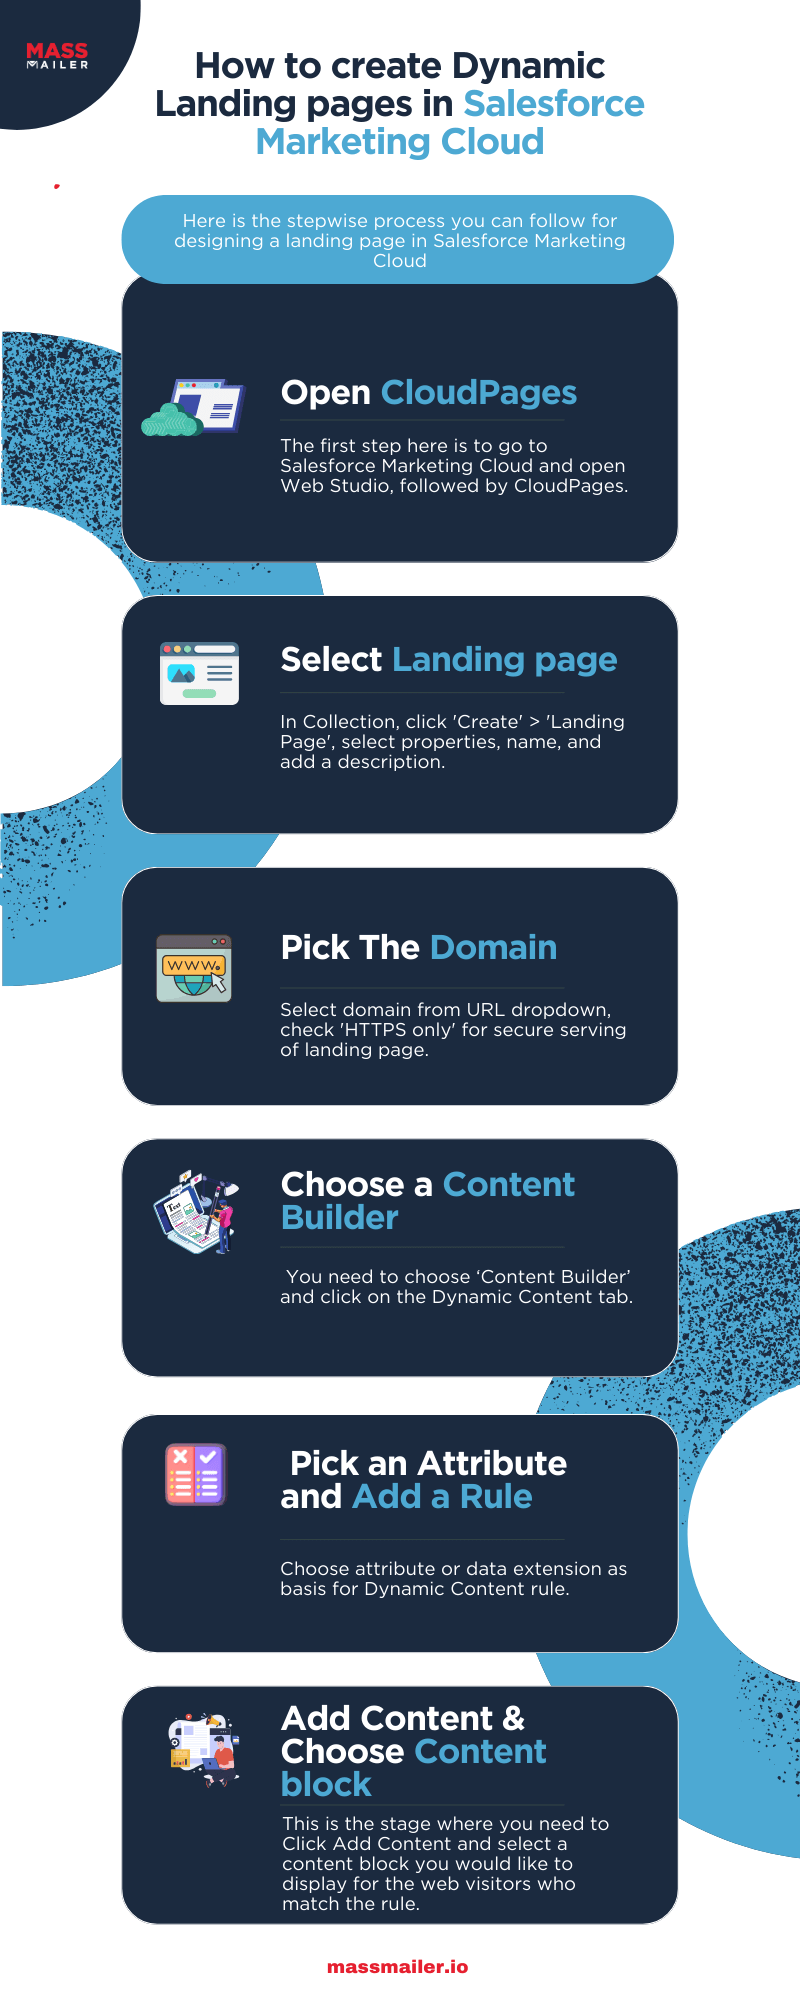 Create Dynamic Landing pages in Salesforce